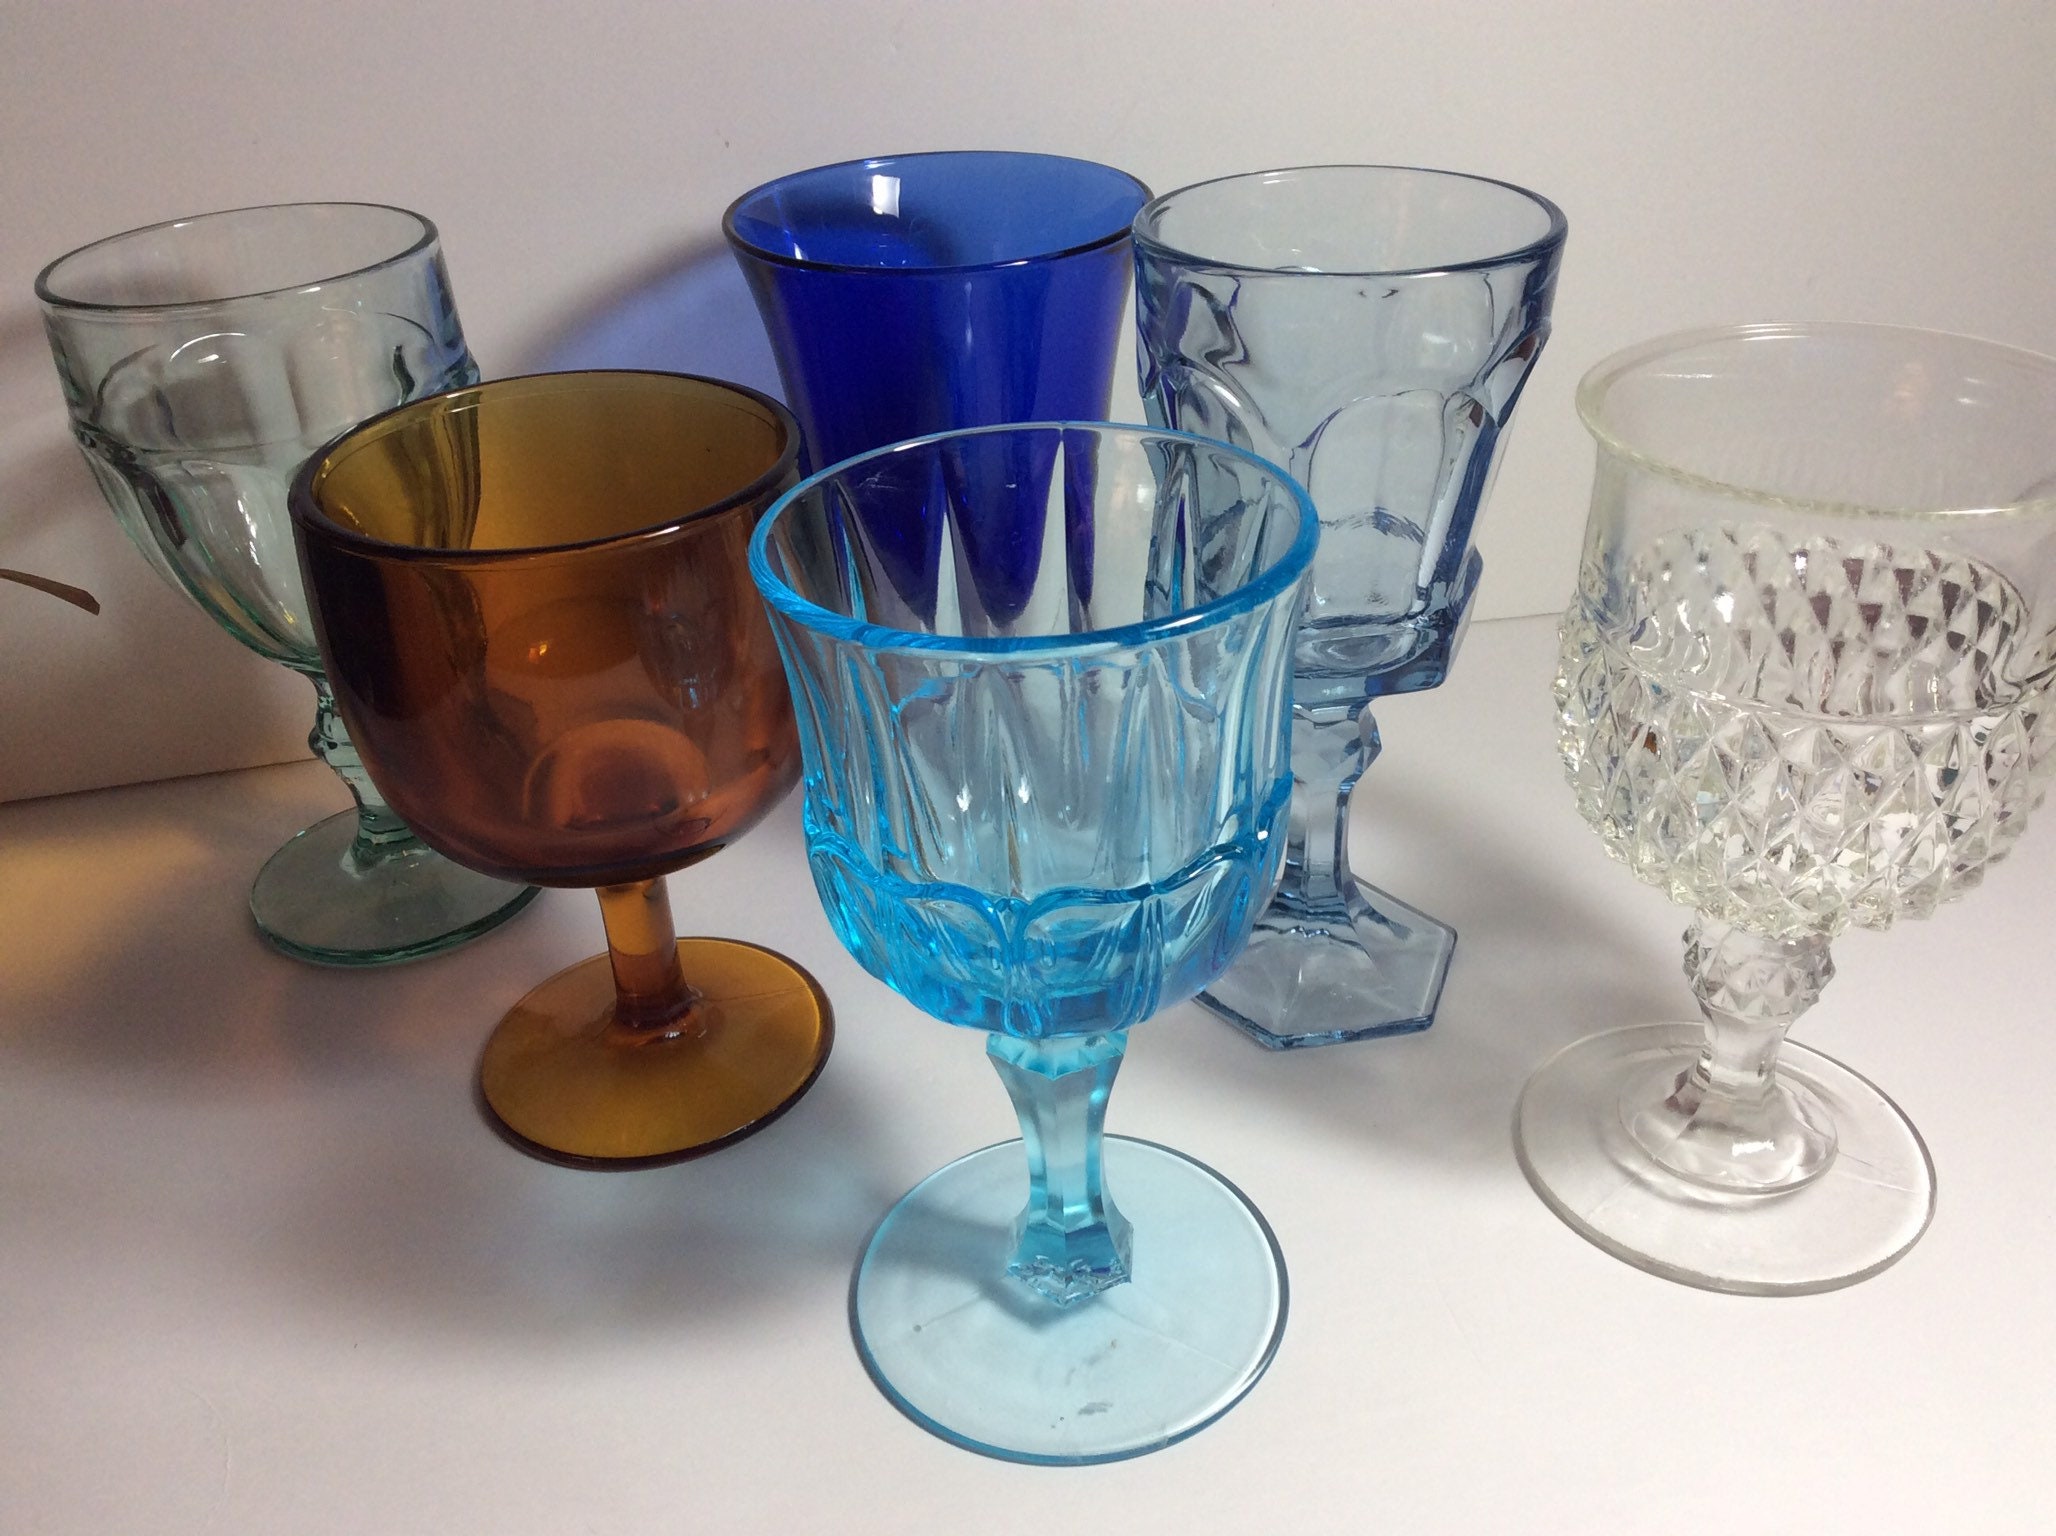 Vintage Wine Glasses Set of 6, 11 Ounce Colored Glass Water Goblets,  Colorful Unique Embossed Patter…See more Vintage Wine Glasses Set of 6, 11  Ounce